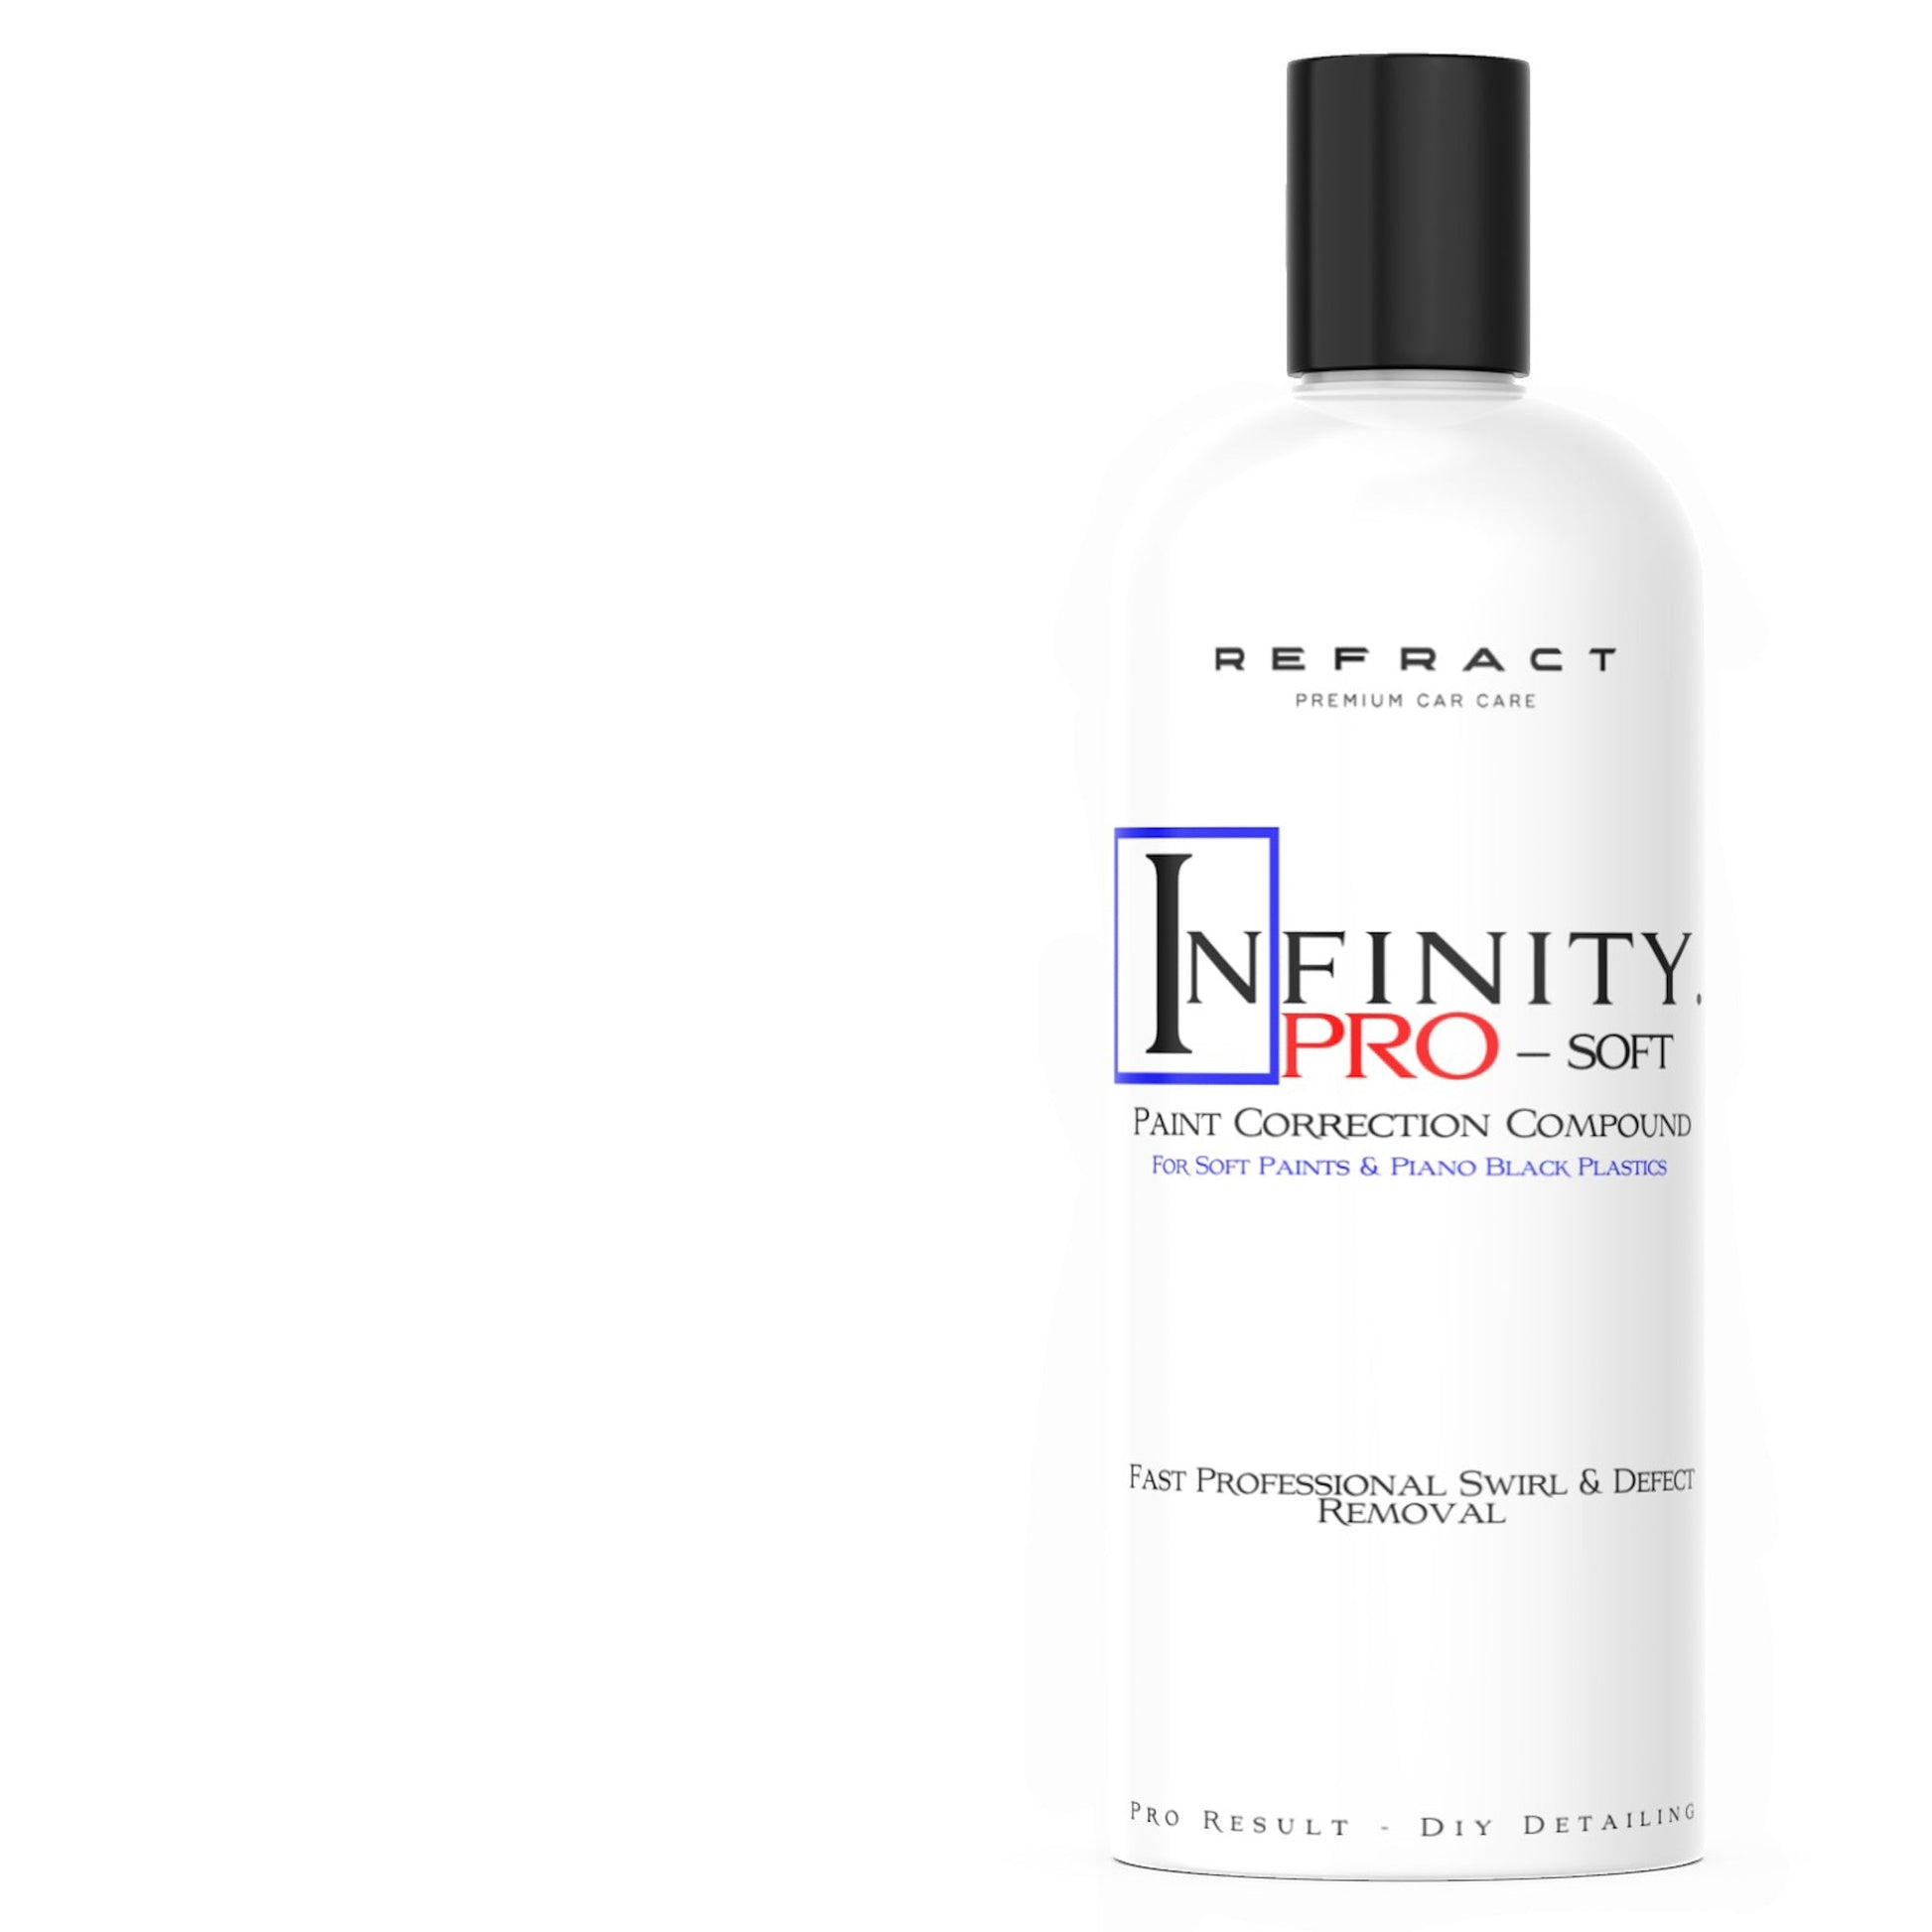 Refract Premium Car Care Products REFRACT Infinity Pro -  Soft Paint Compound Polish $69.95